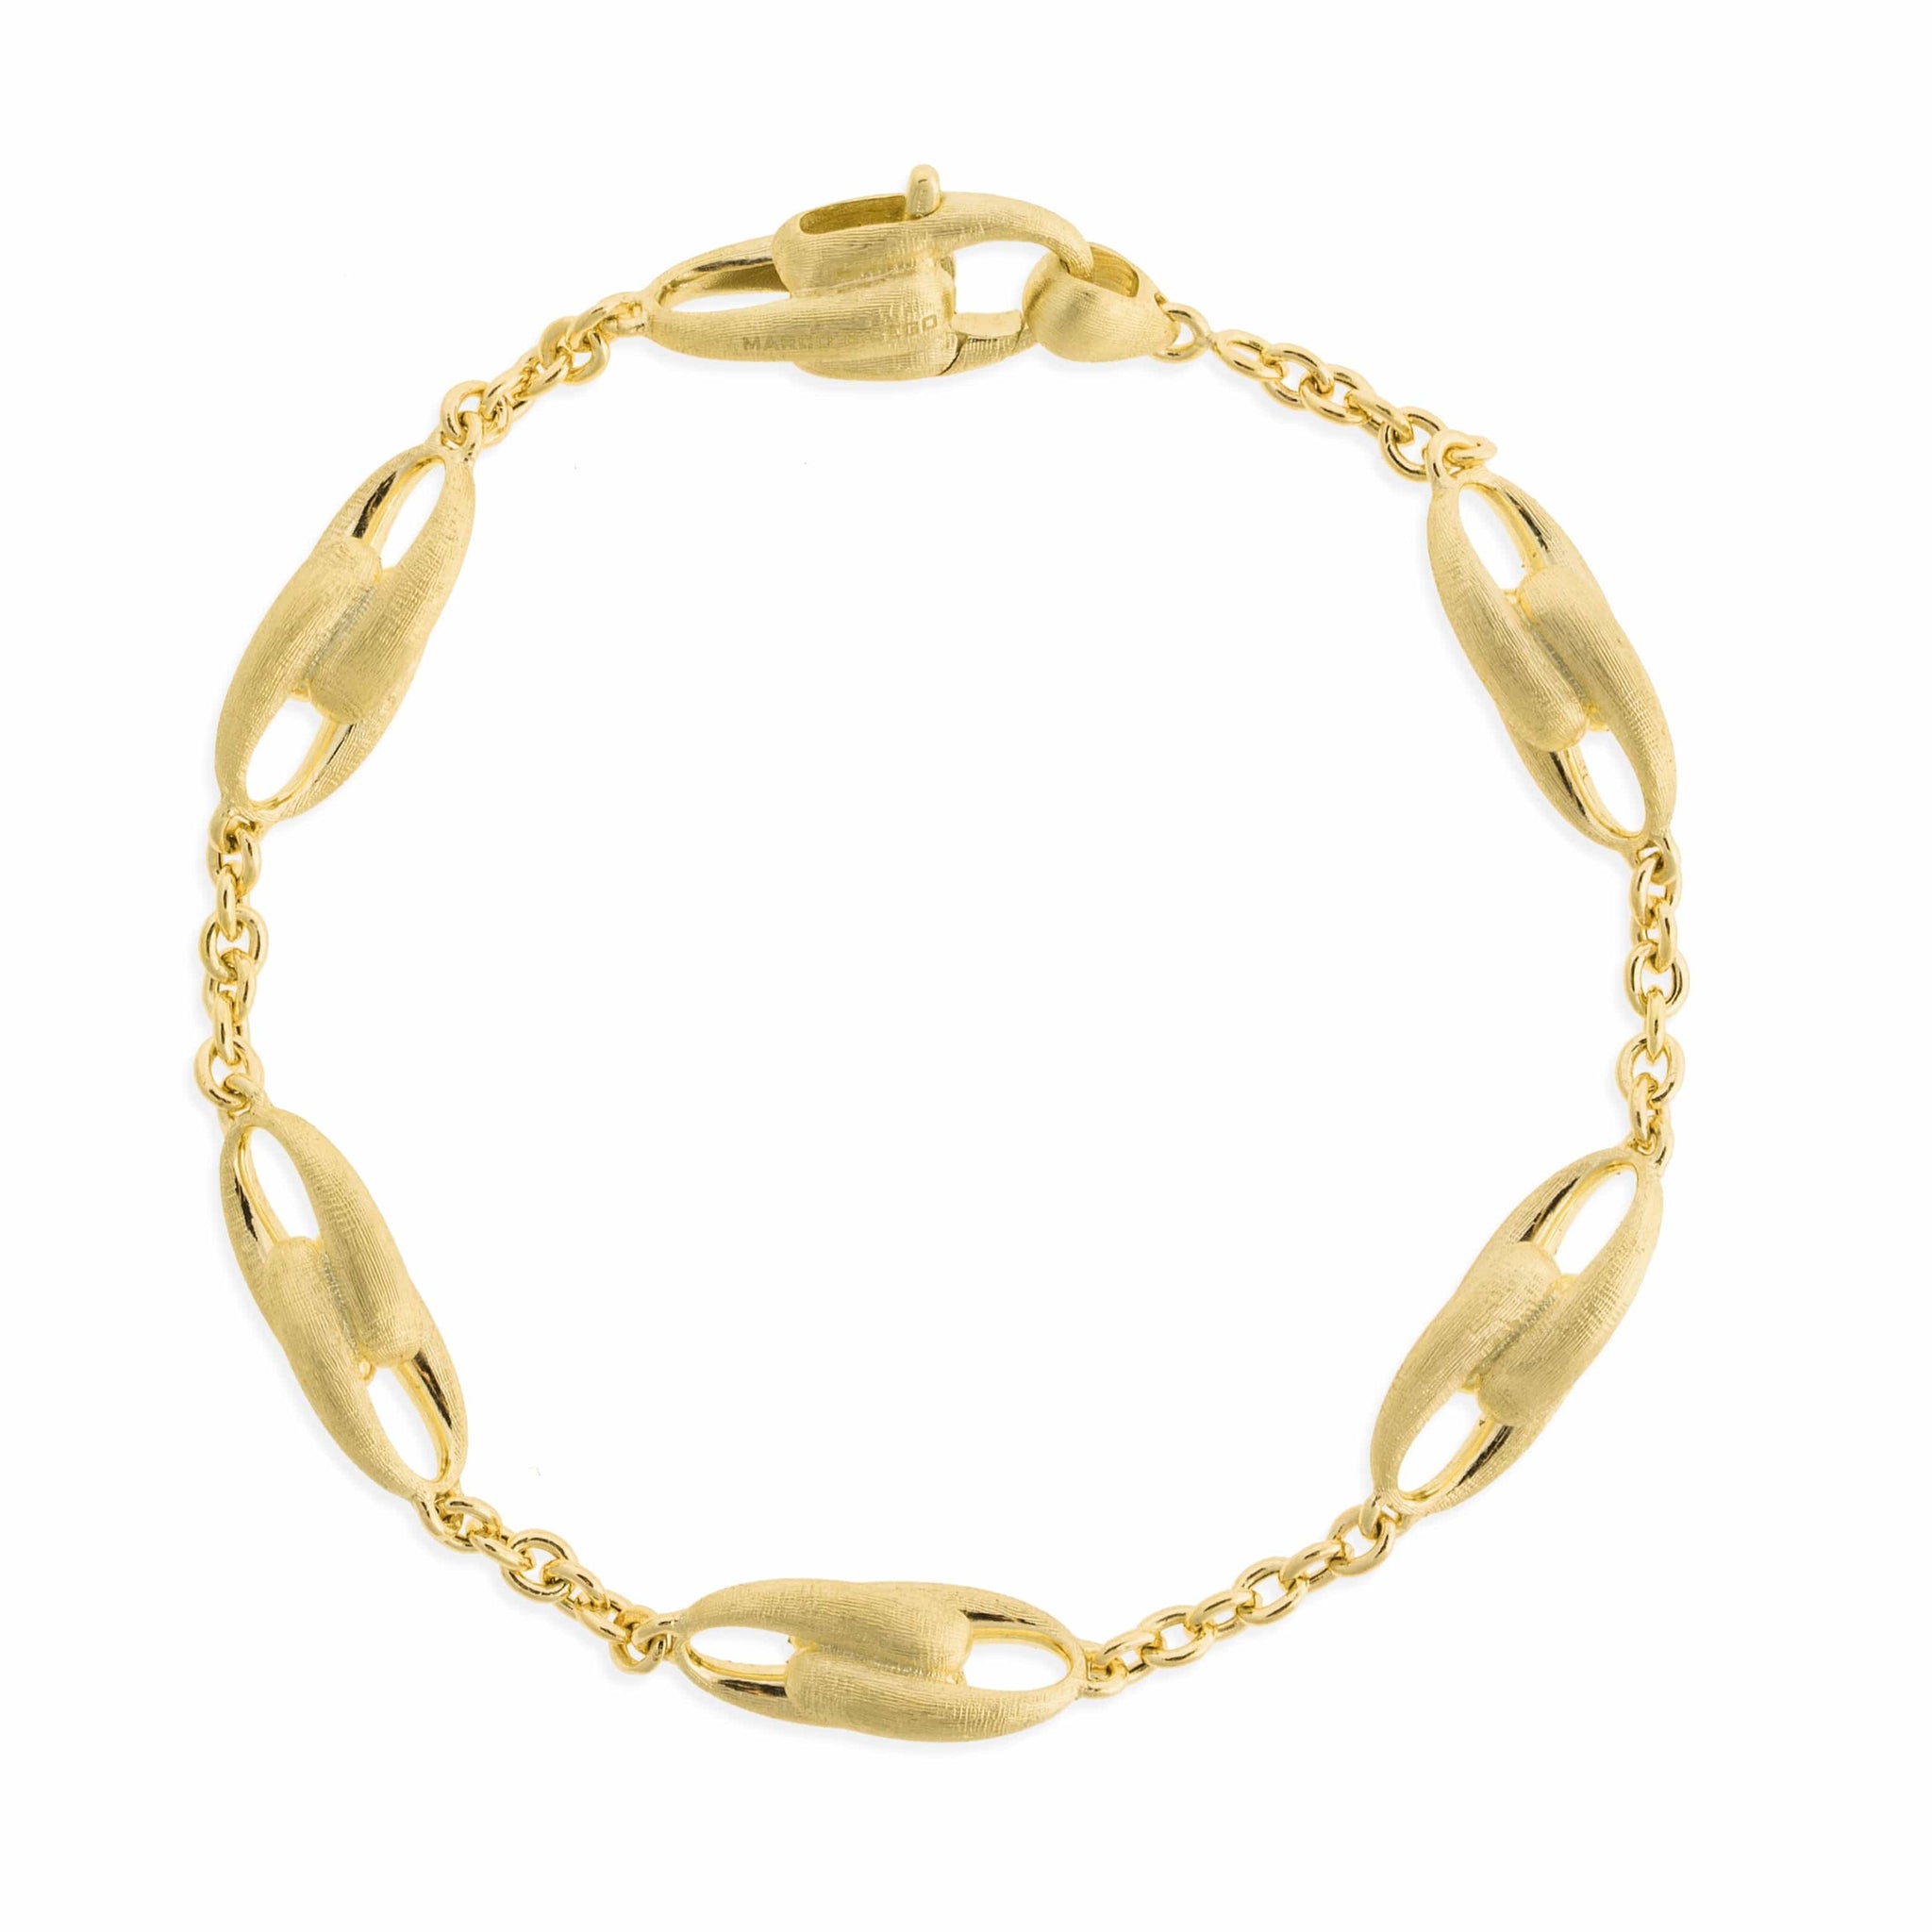 Marco Bicego Lucia 18K Yellow Gold Link Bracelet